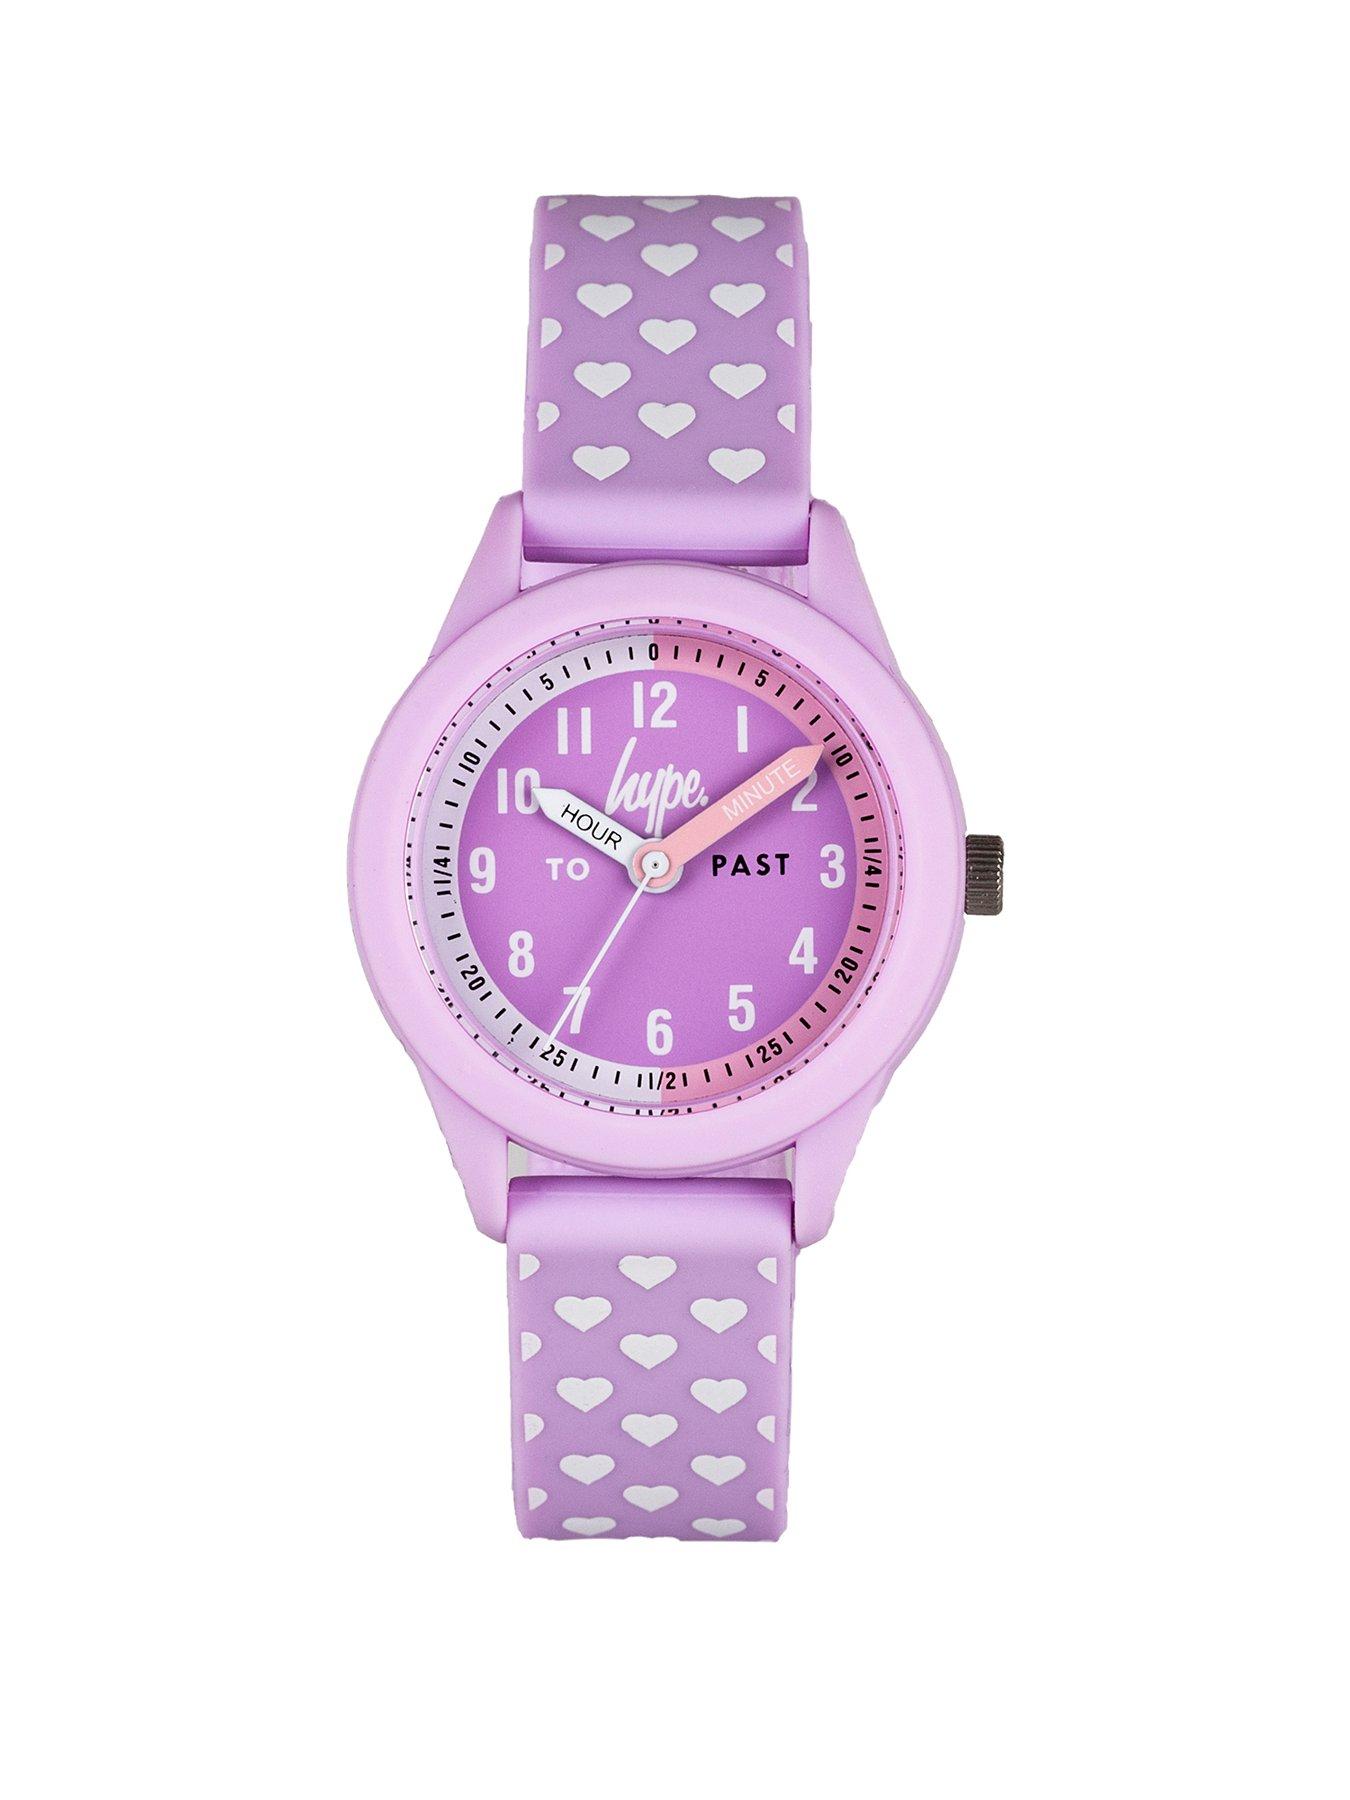  Hype Kids Lilac with Heart Pattern Silicone Strap with Lilac Dial